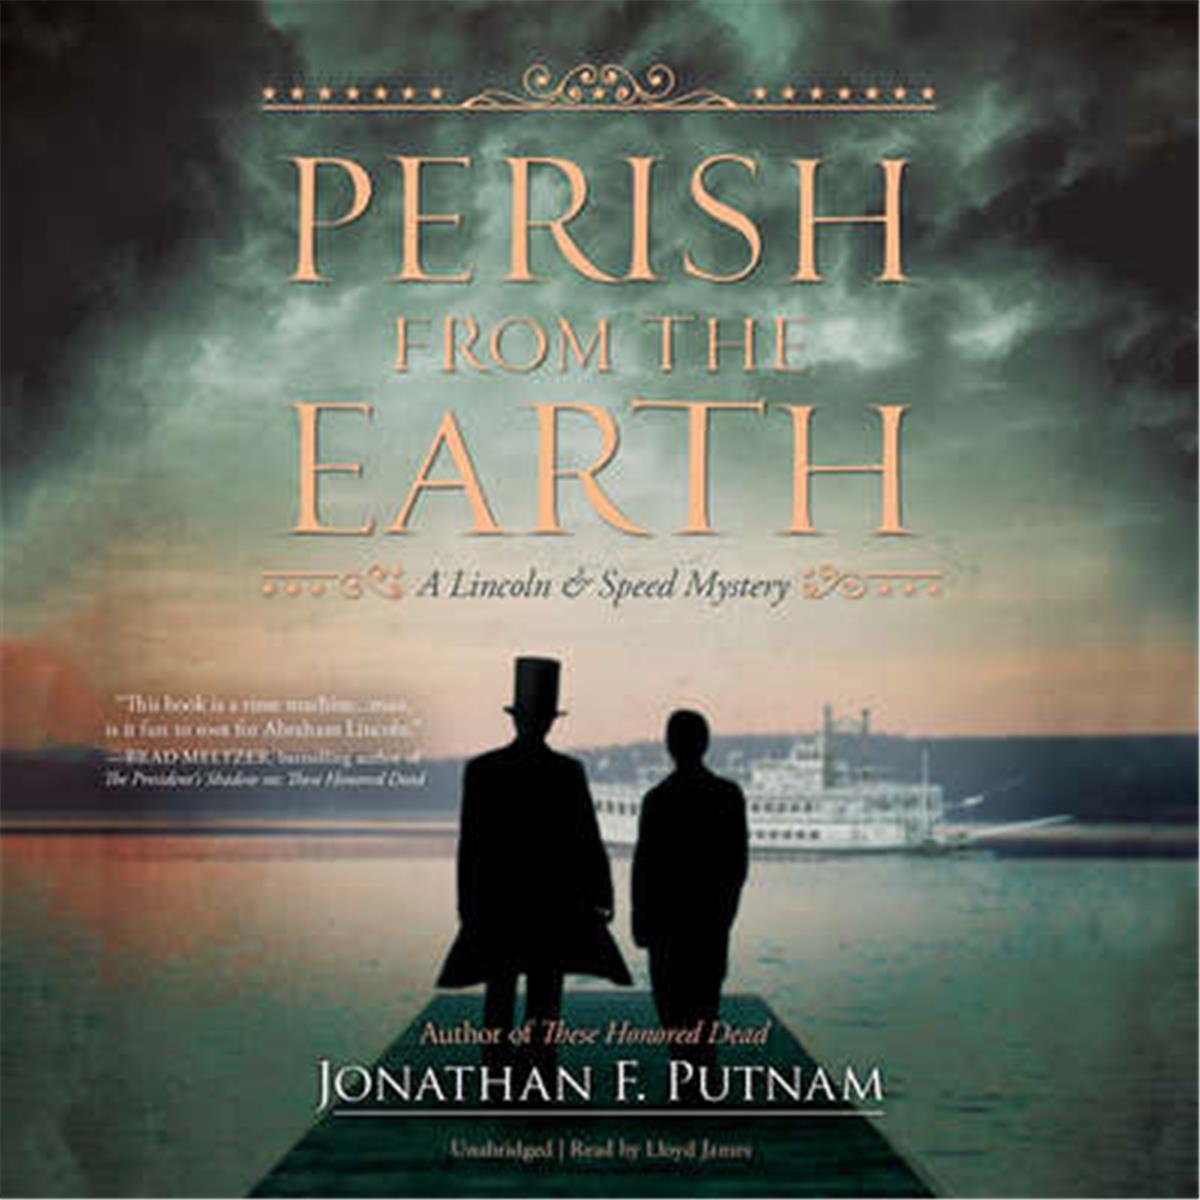 Picture of Blackstone Audio 9781538406007 Perish From The Earth - A Lincoln & Speed Mystery Audio Book